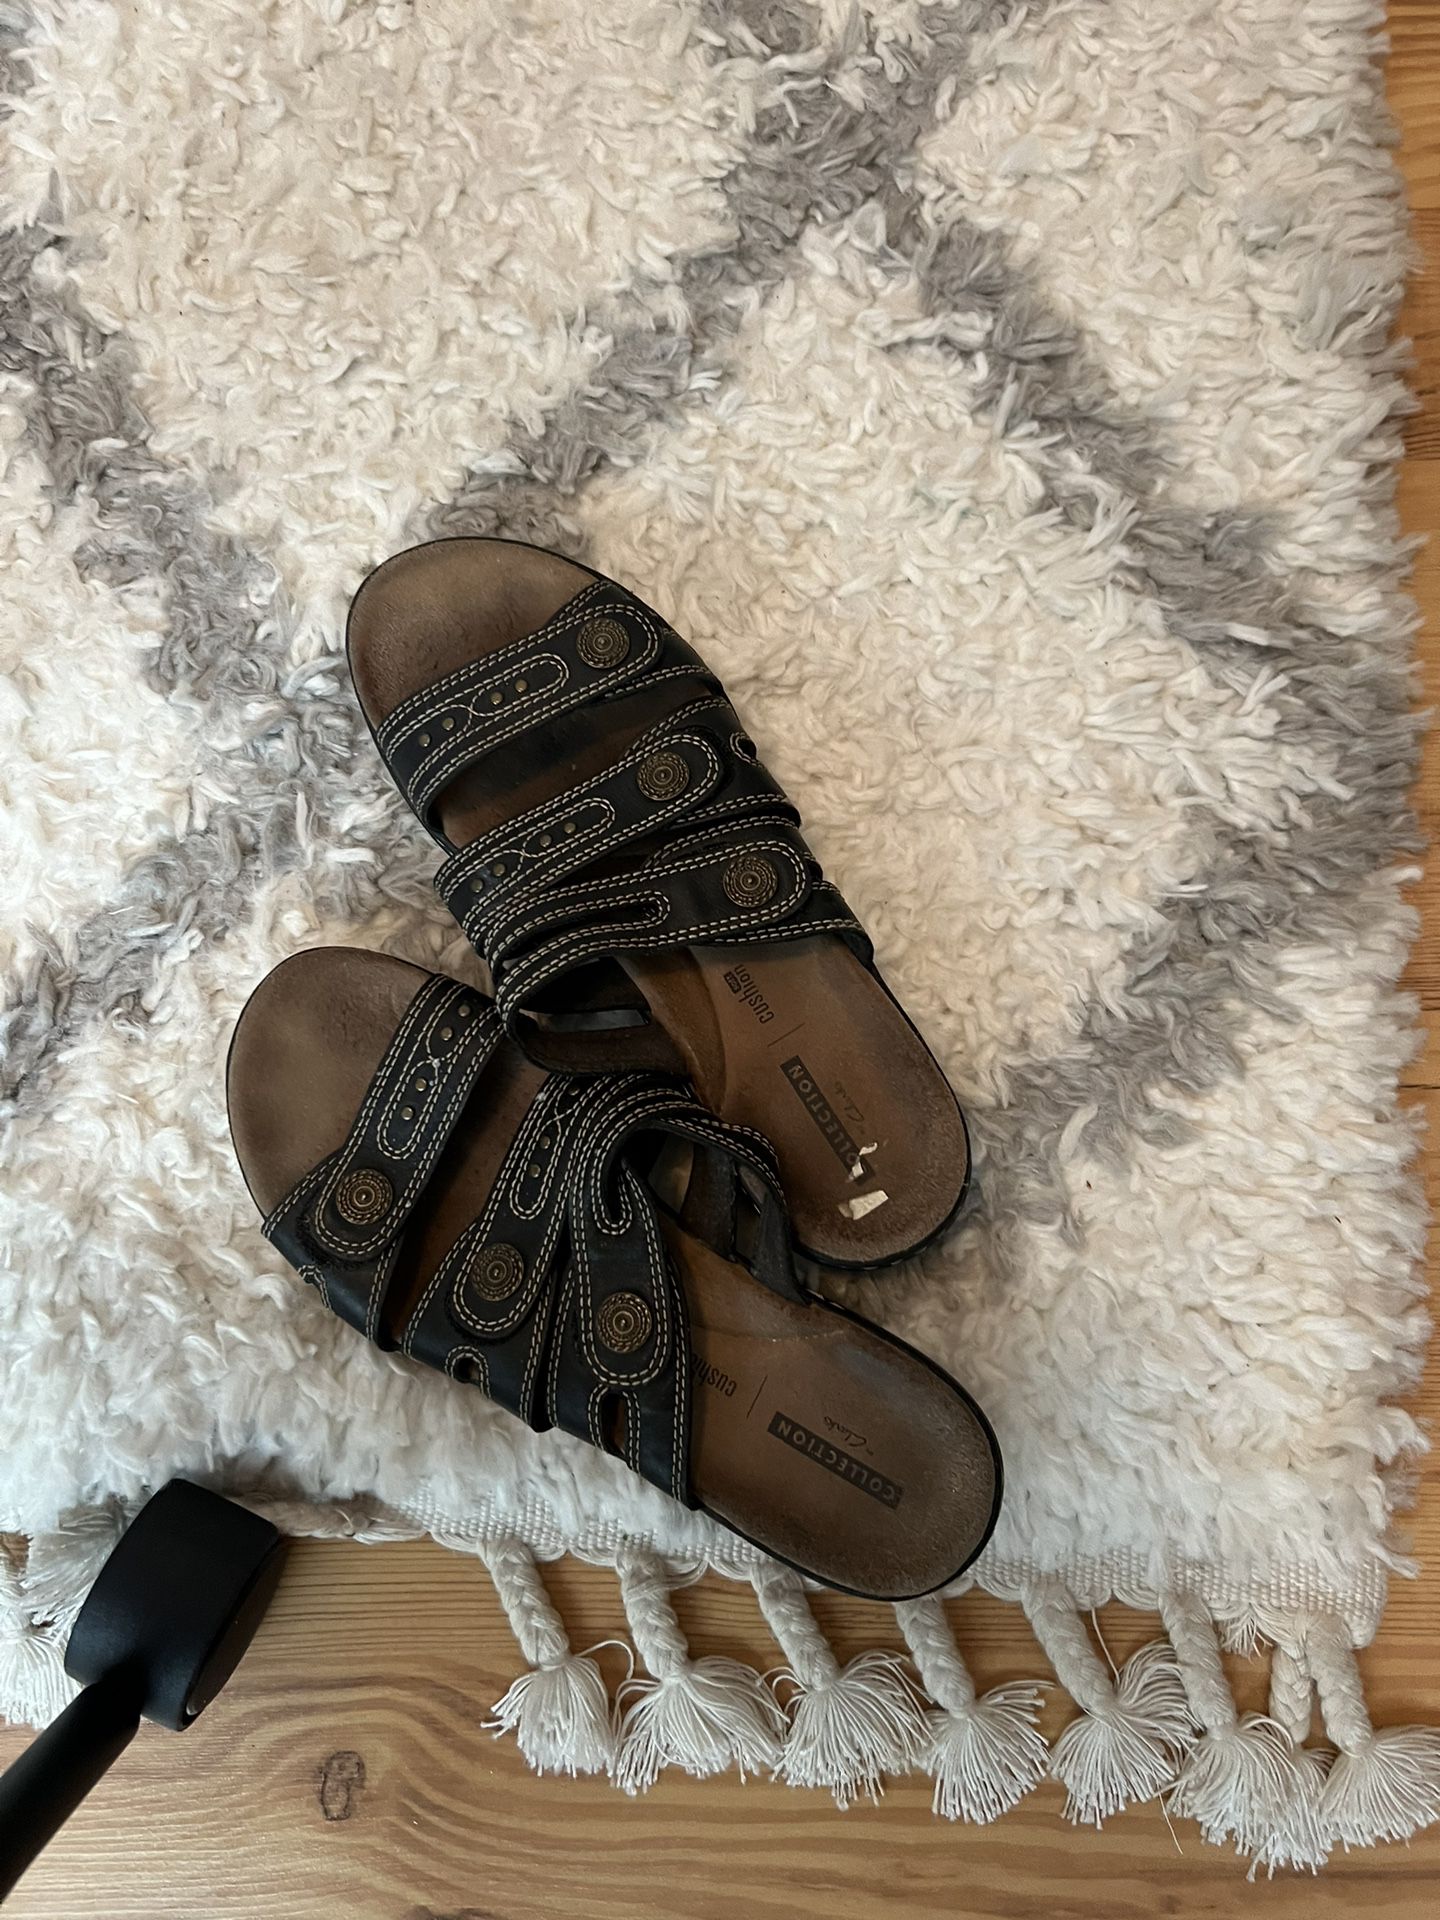 Cowboy Boots $20 Brown Boots With Fring &50